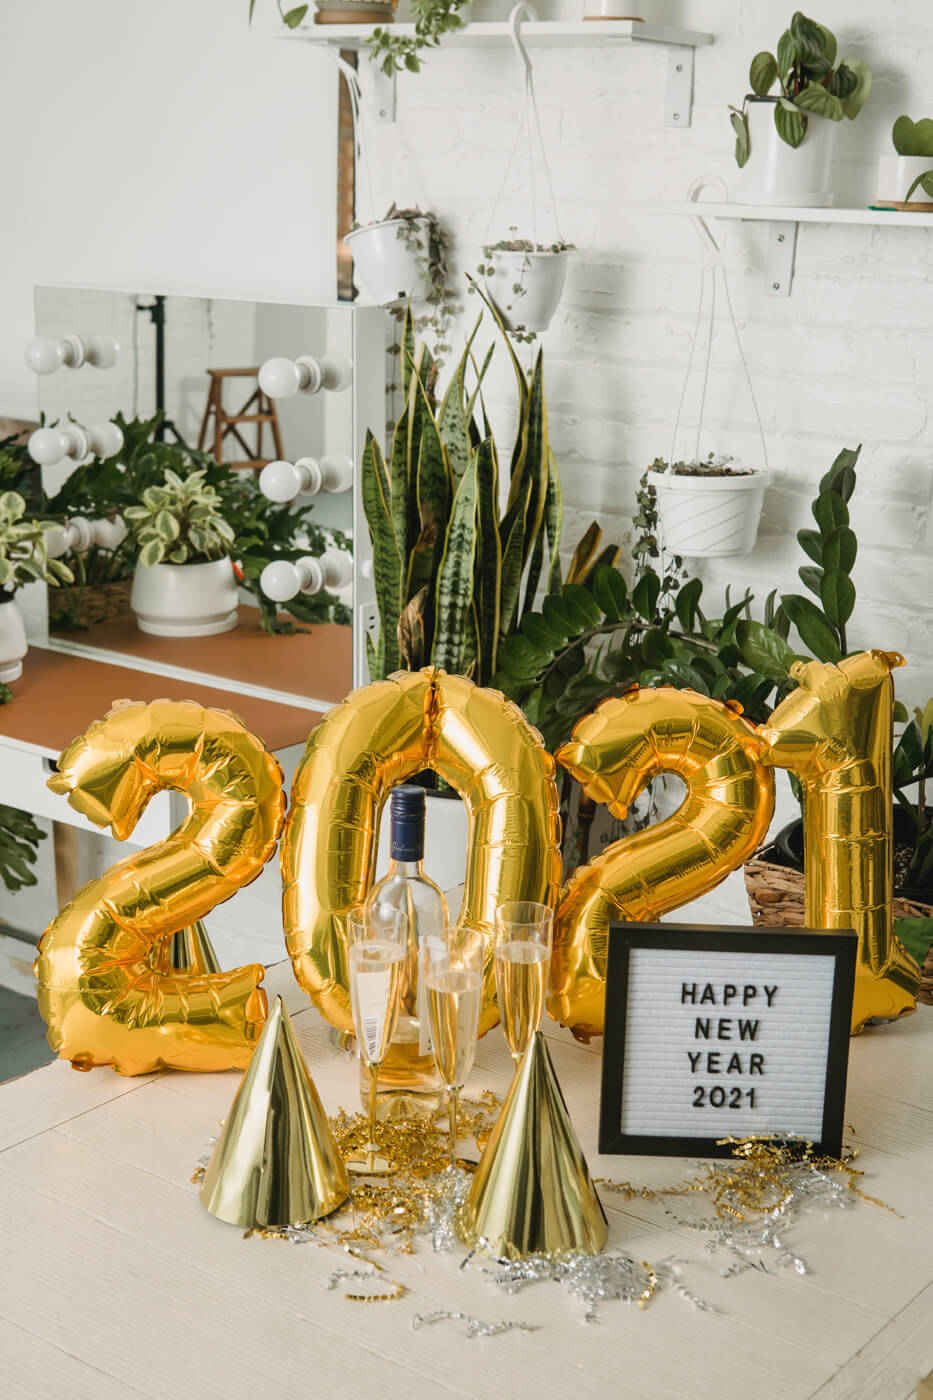 5 Fun Family-Friendly Ways  to Ring in the New Year